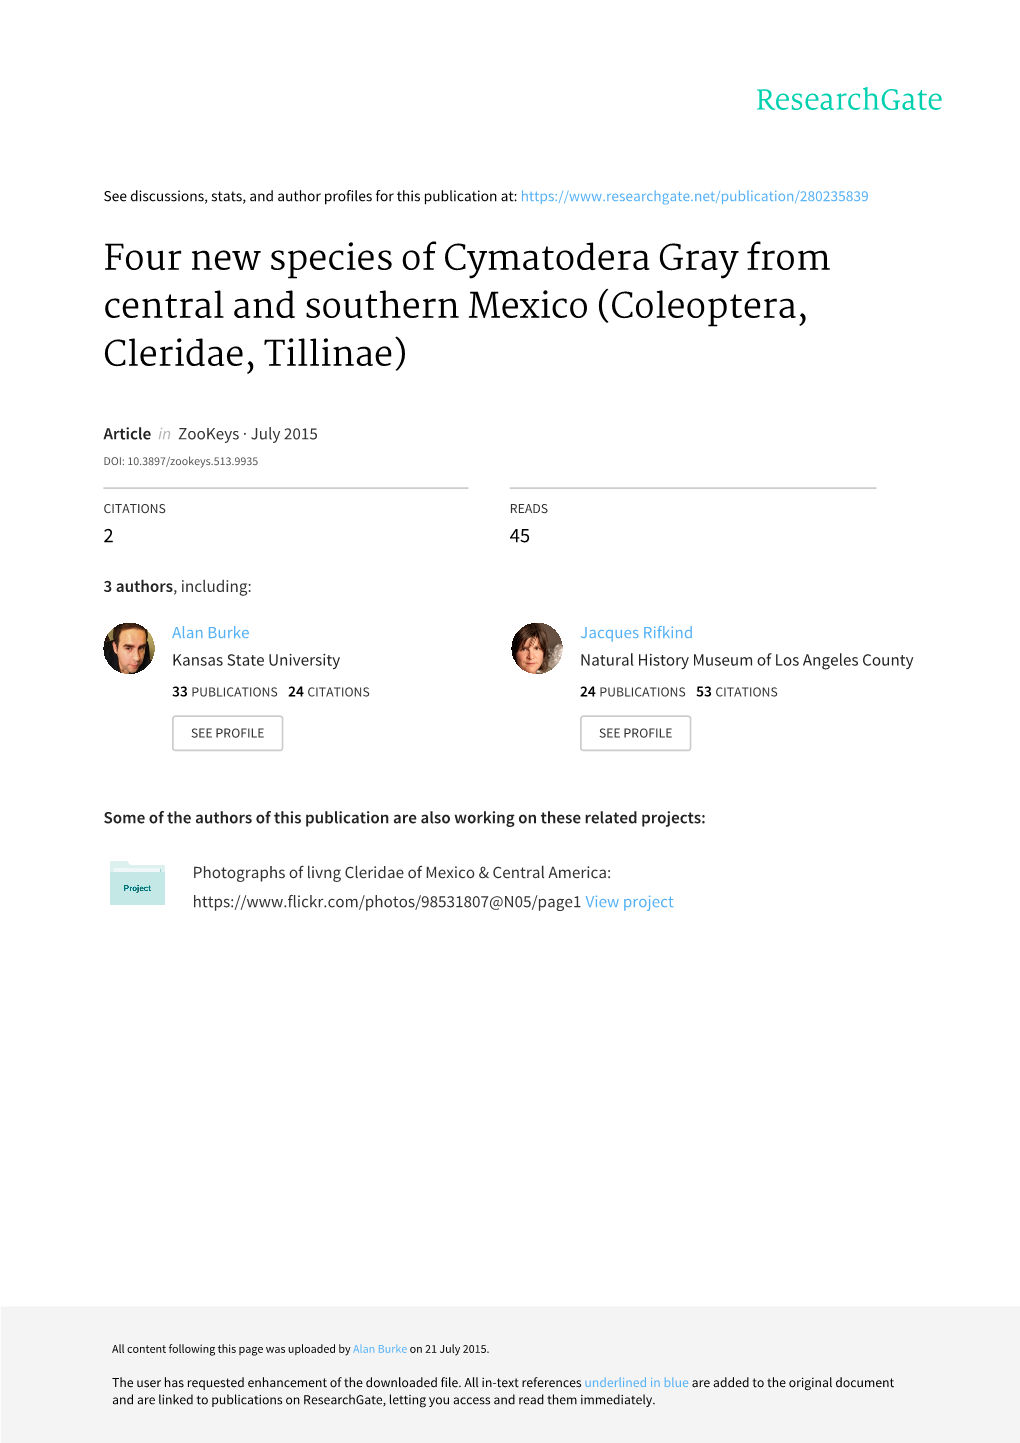 ﻿Four New Species of Cymatodera Gray from Central and Southern Mexico